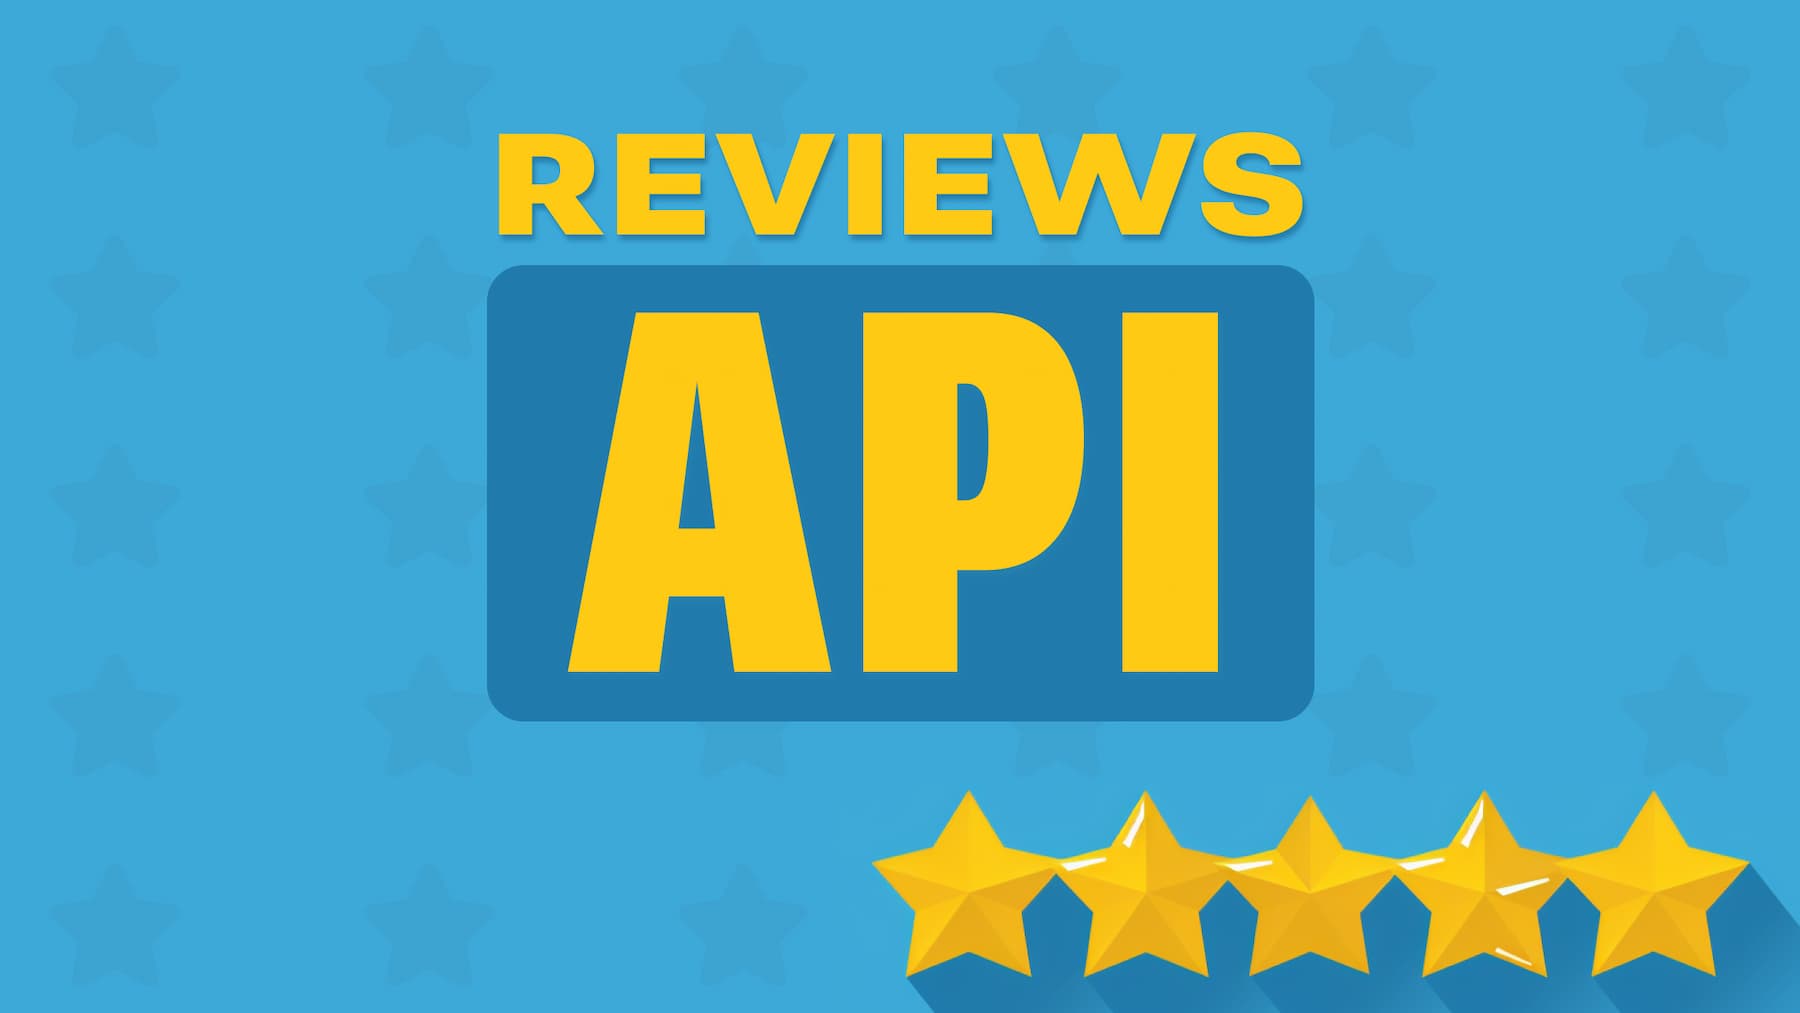 Reviews api logo with stars on a blue background.